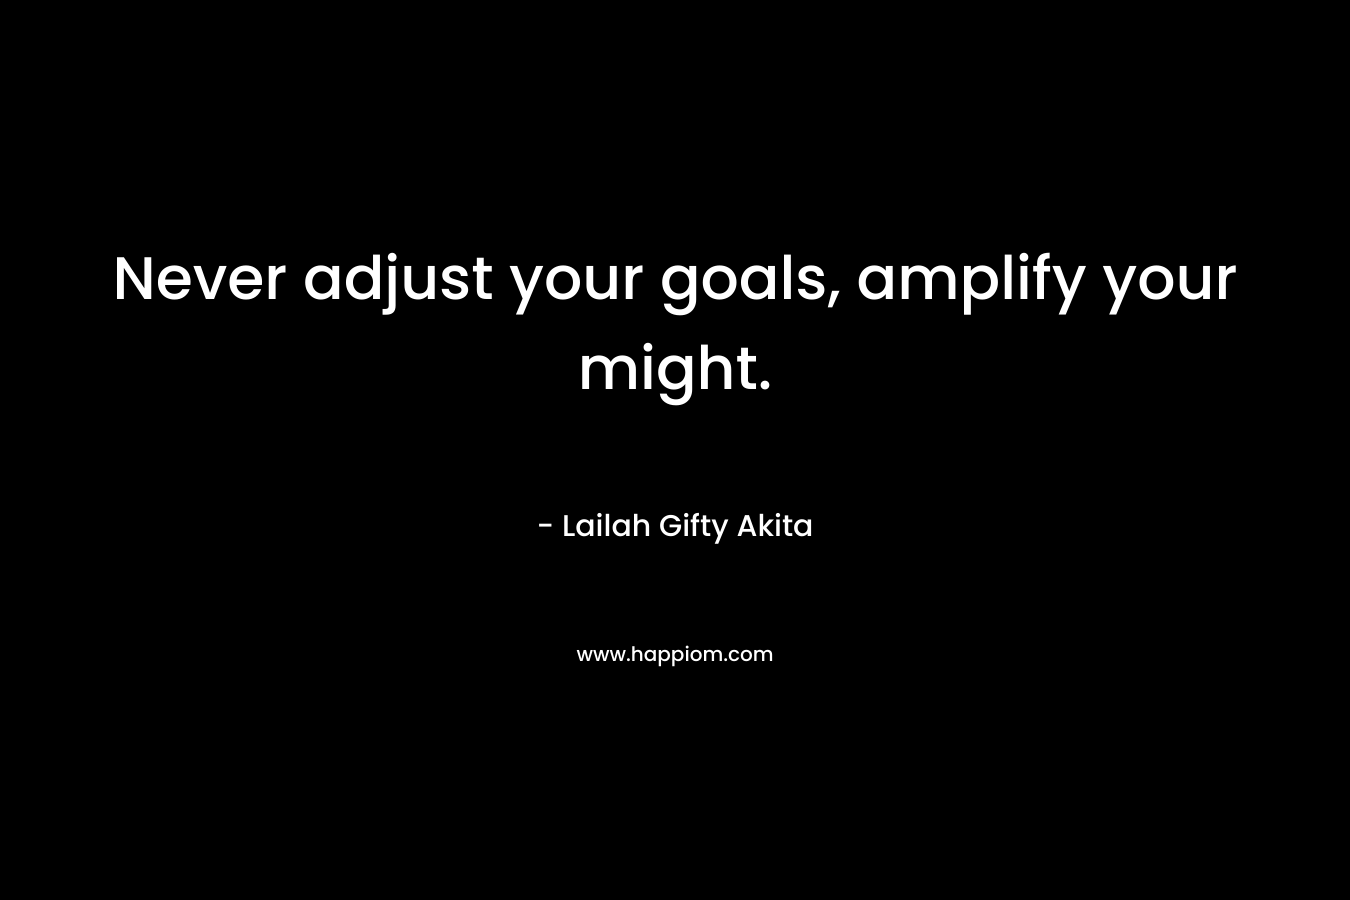 Never adjust your goals, amplify your might.